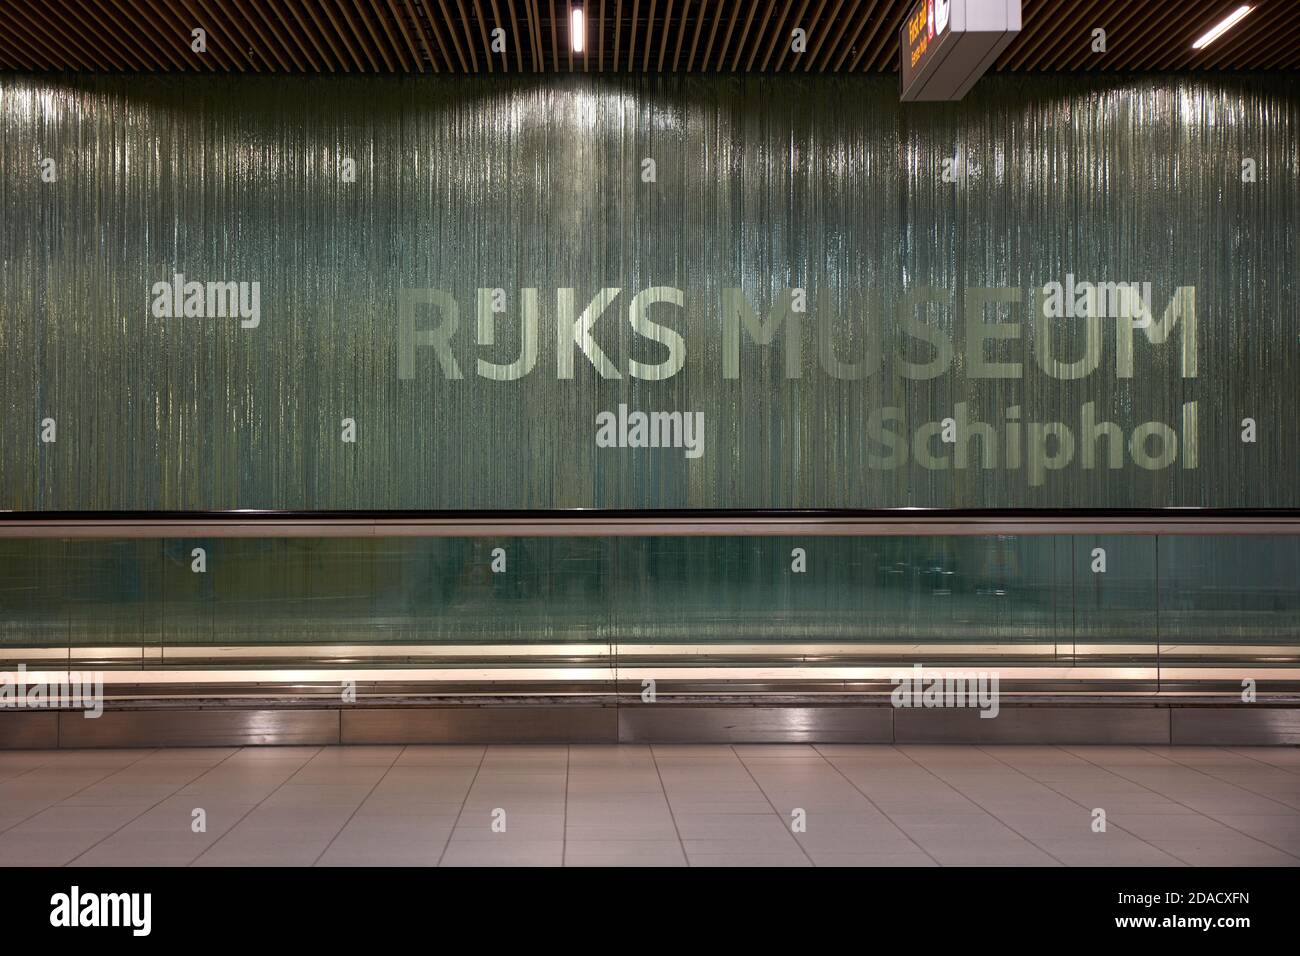 The 'Ruks Museum' inside the Schiphol Airport in Amsterdam, Holland. Stock Photo